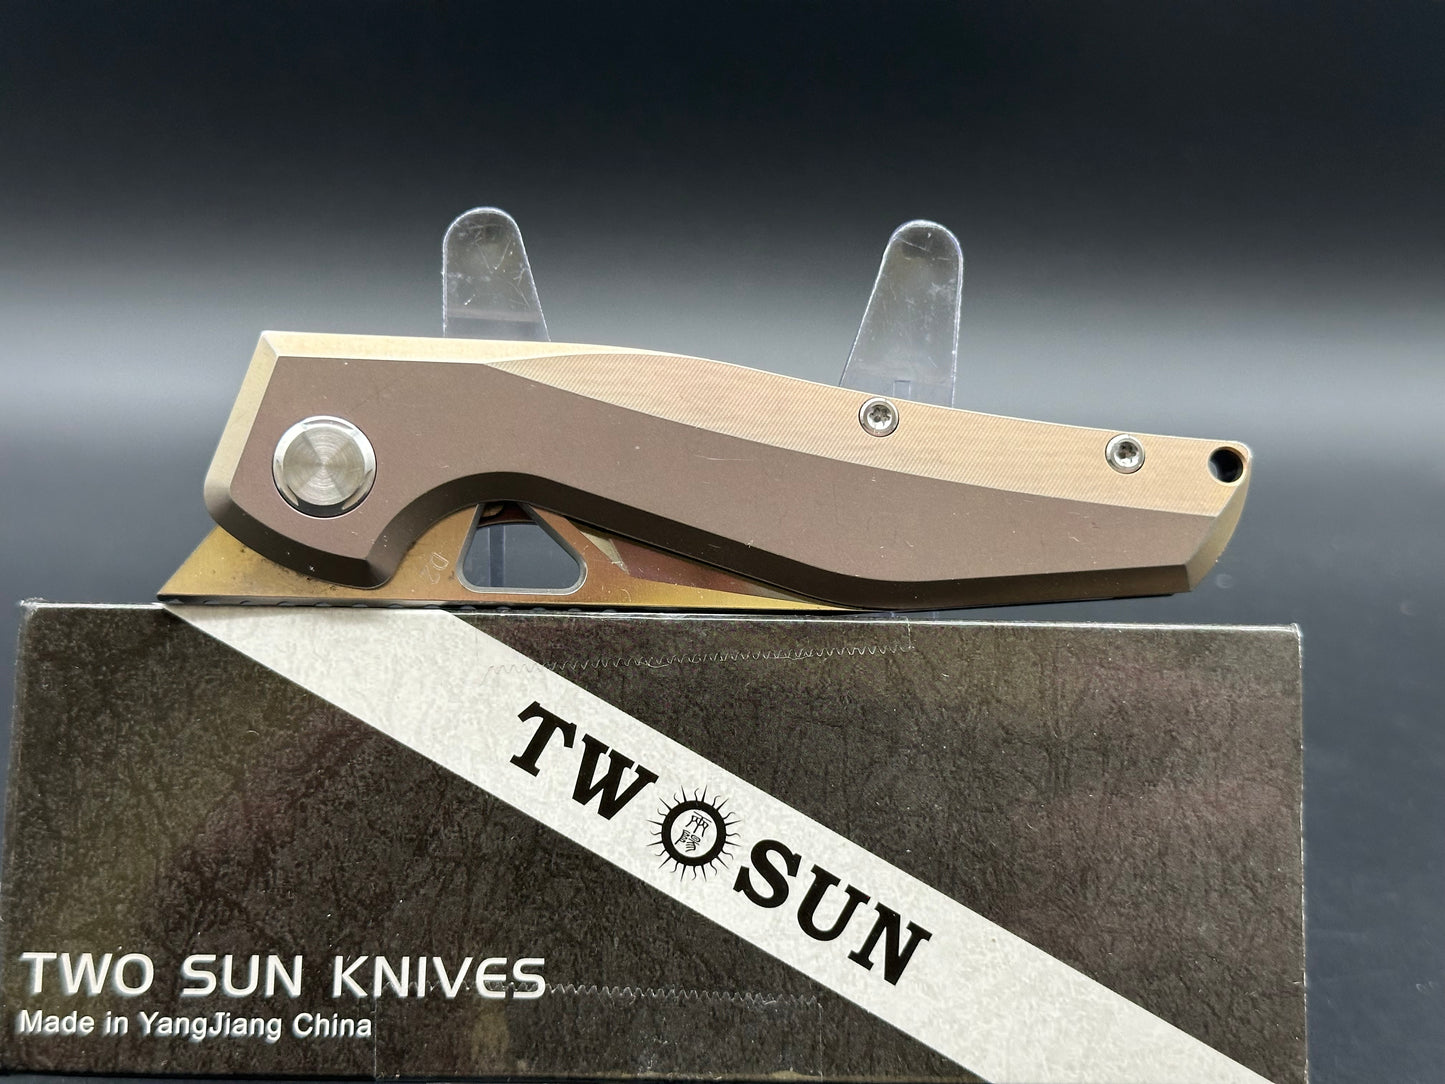 Twosun TS108 D2 and TS47 D2 bundle deal both knives for one price